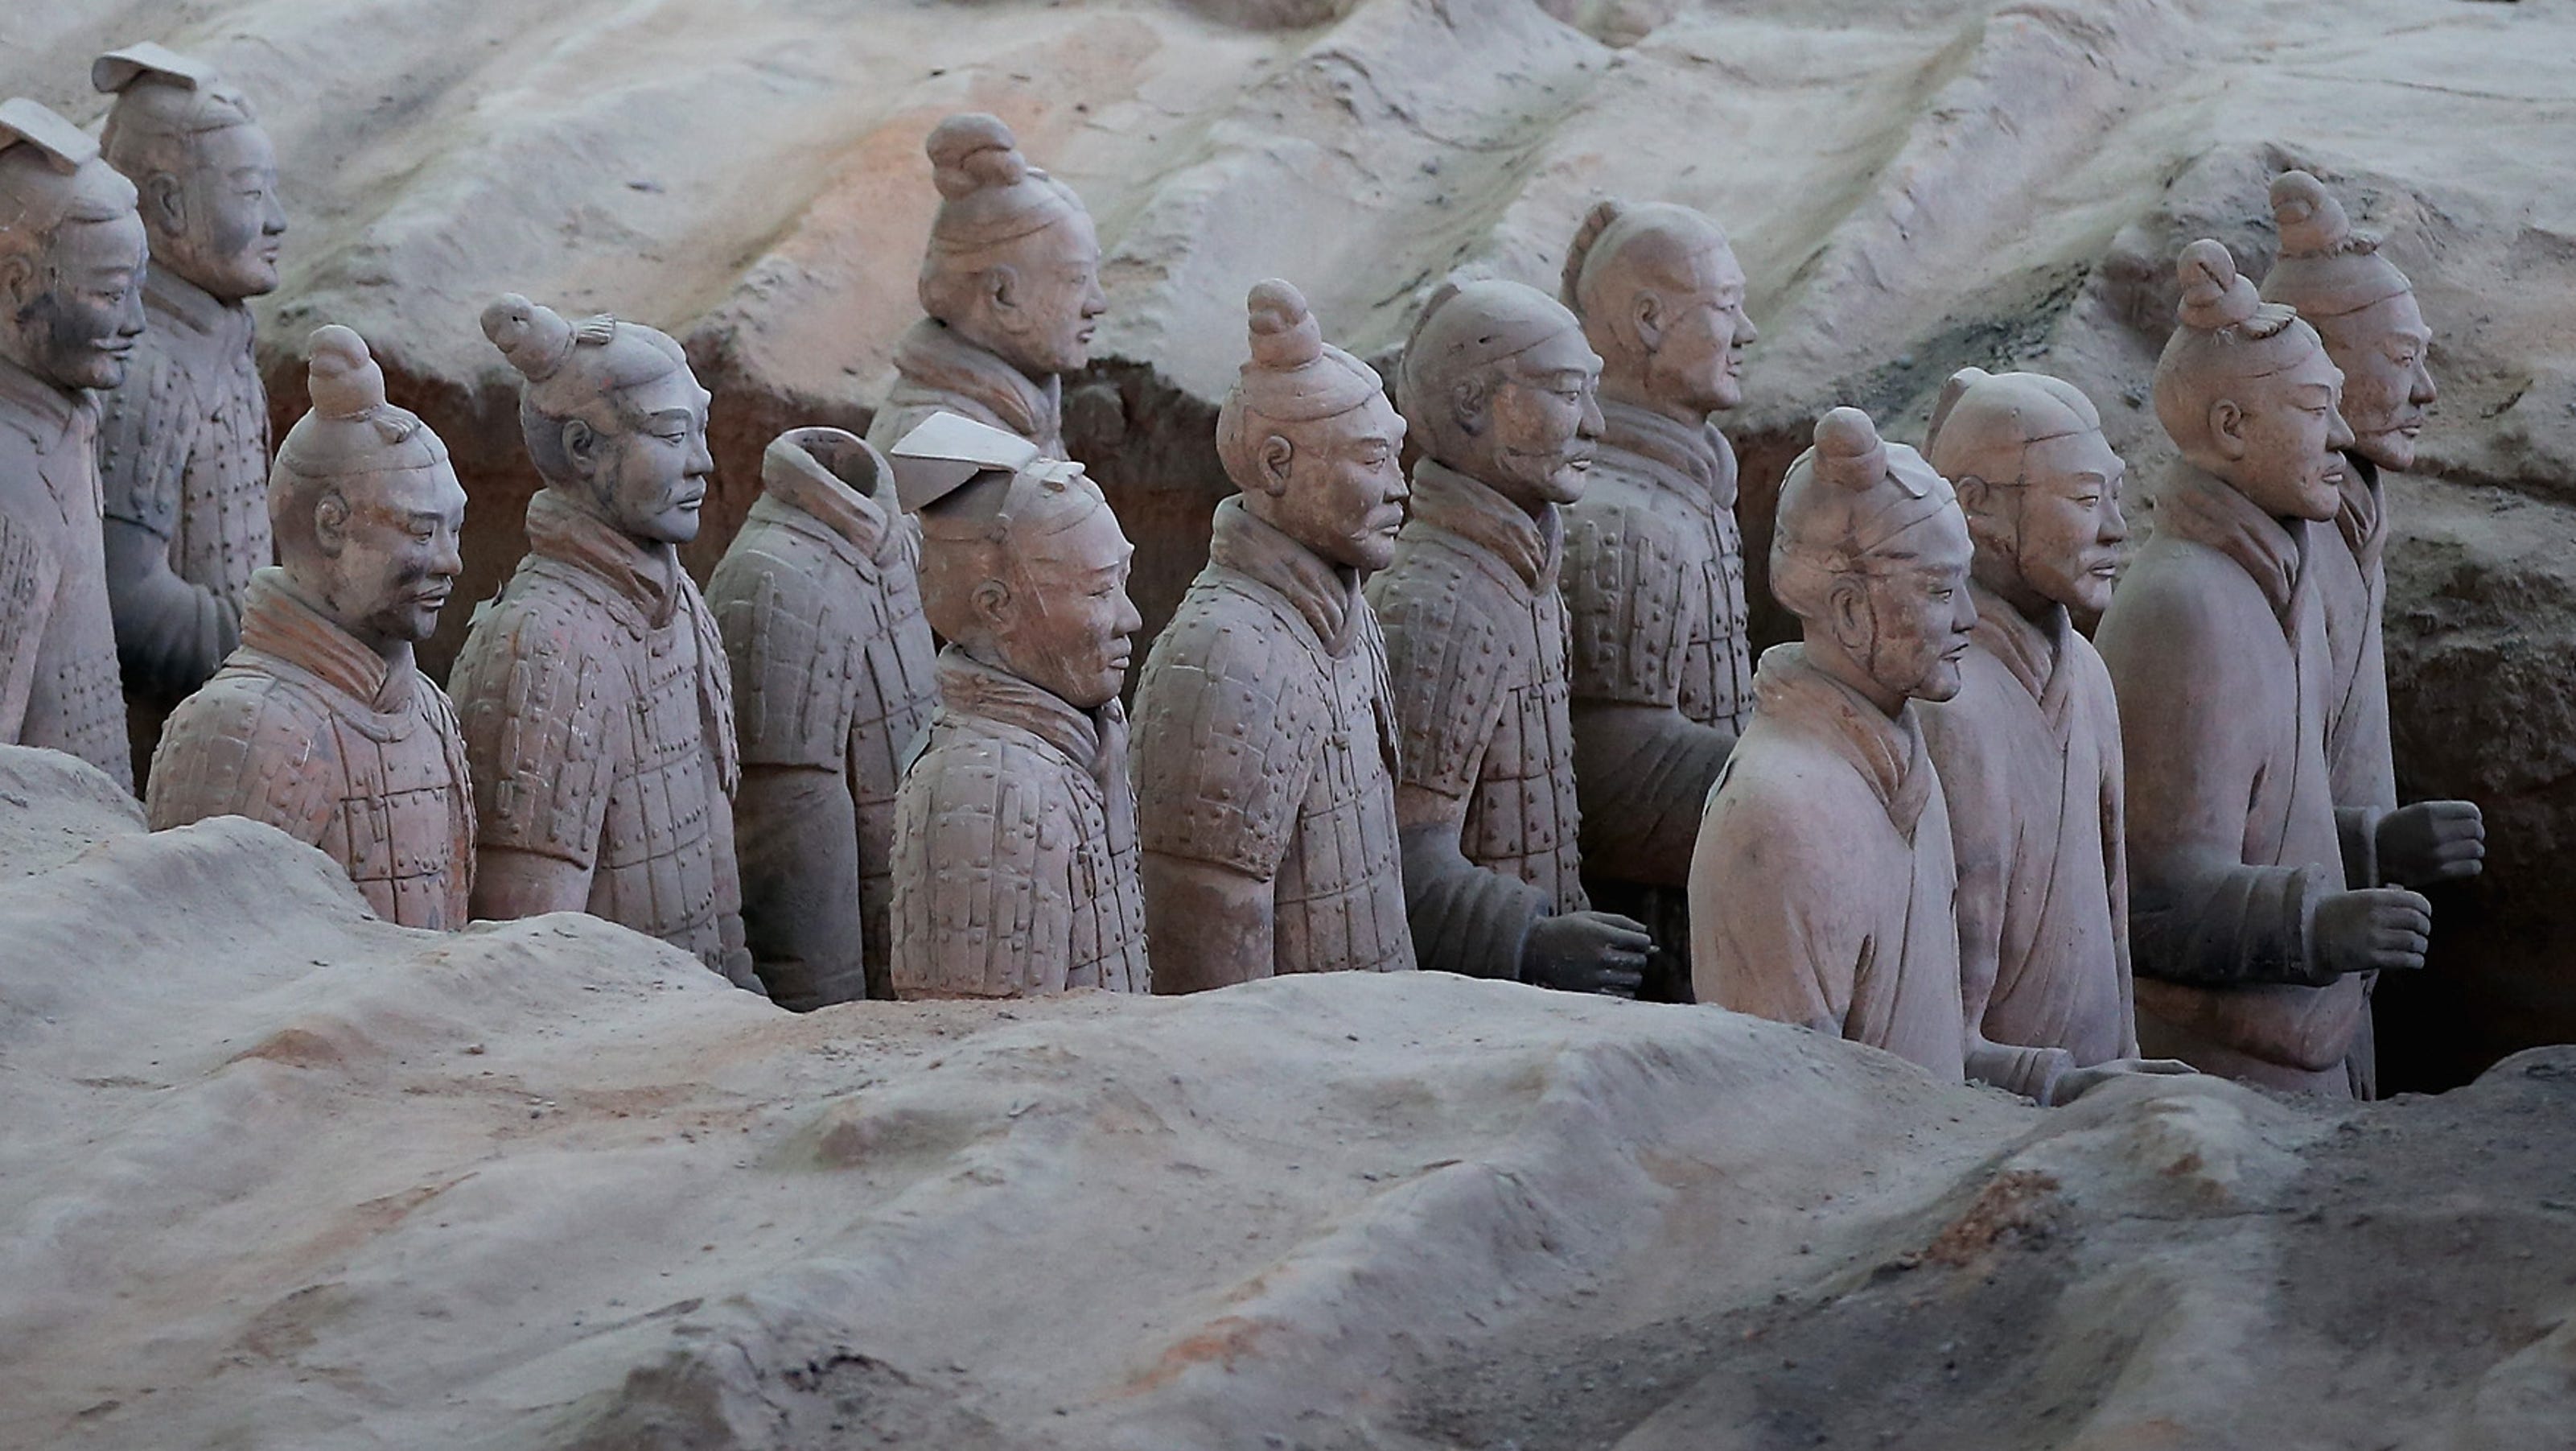 Mystery of China's Terracotta Army solved3200 x 1800